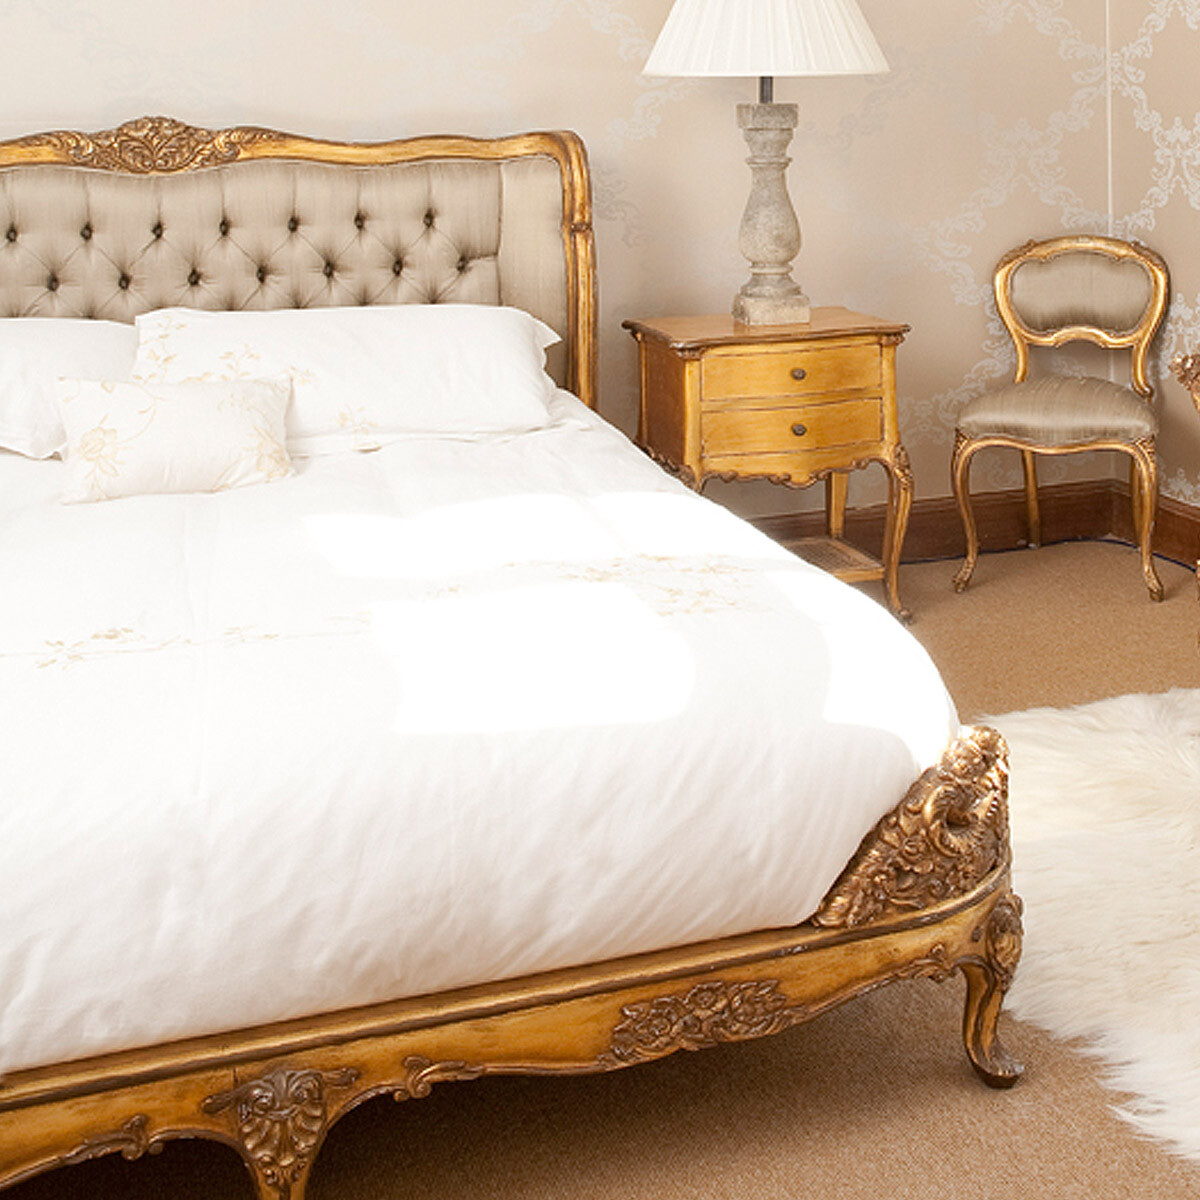 French beds - Versailles Luxury 1 - The French Bedroom Company - www.homeworlddesign.com